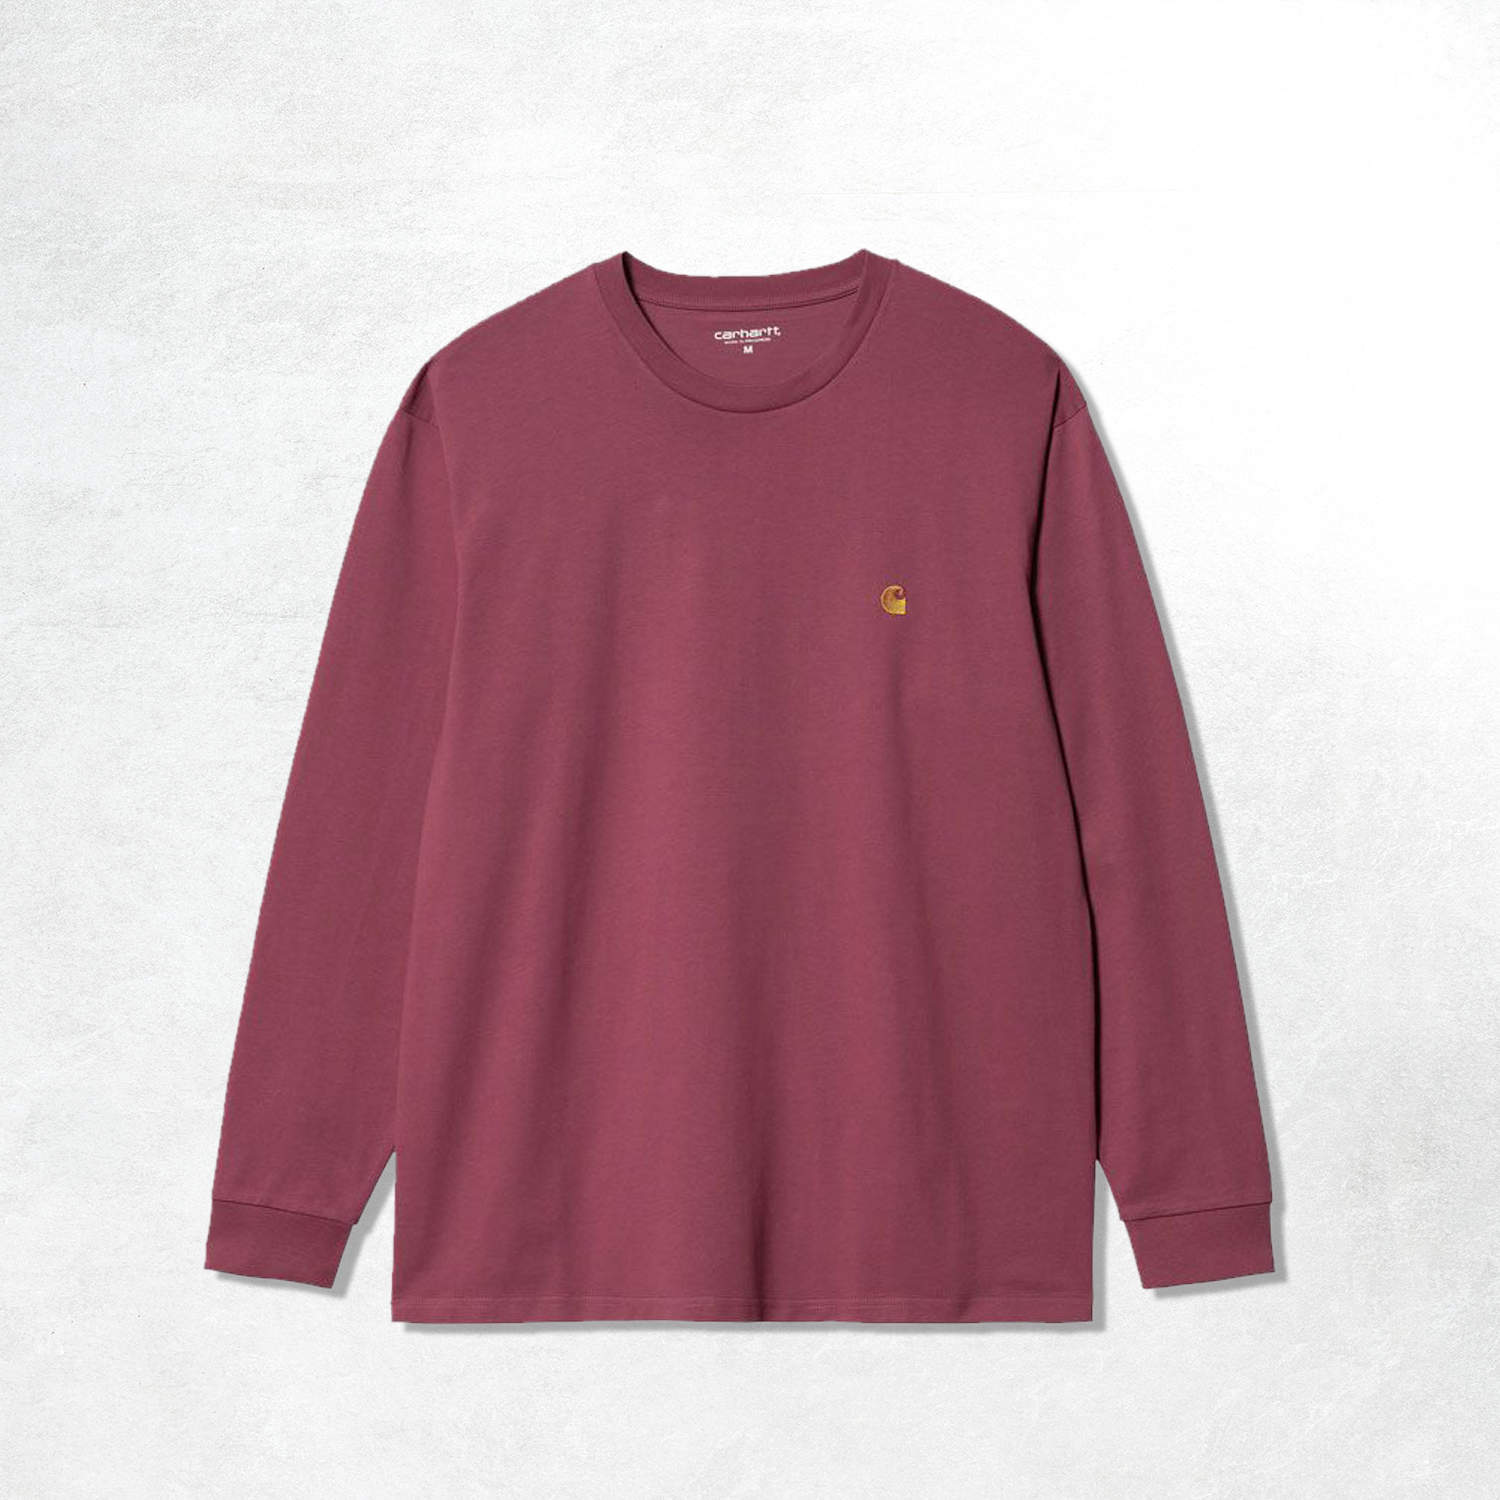 Carhartt WIP L/S Chase T-Shirt: Punch/Gold.1